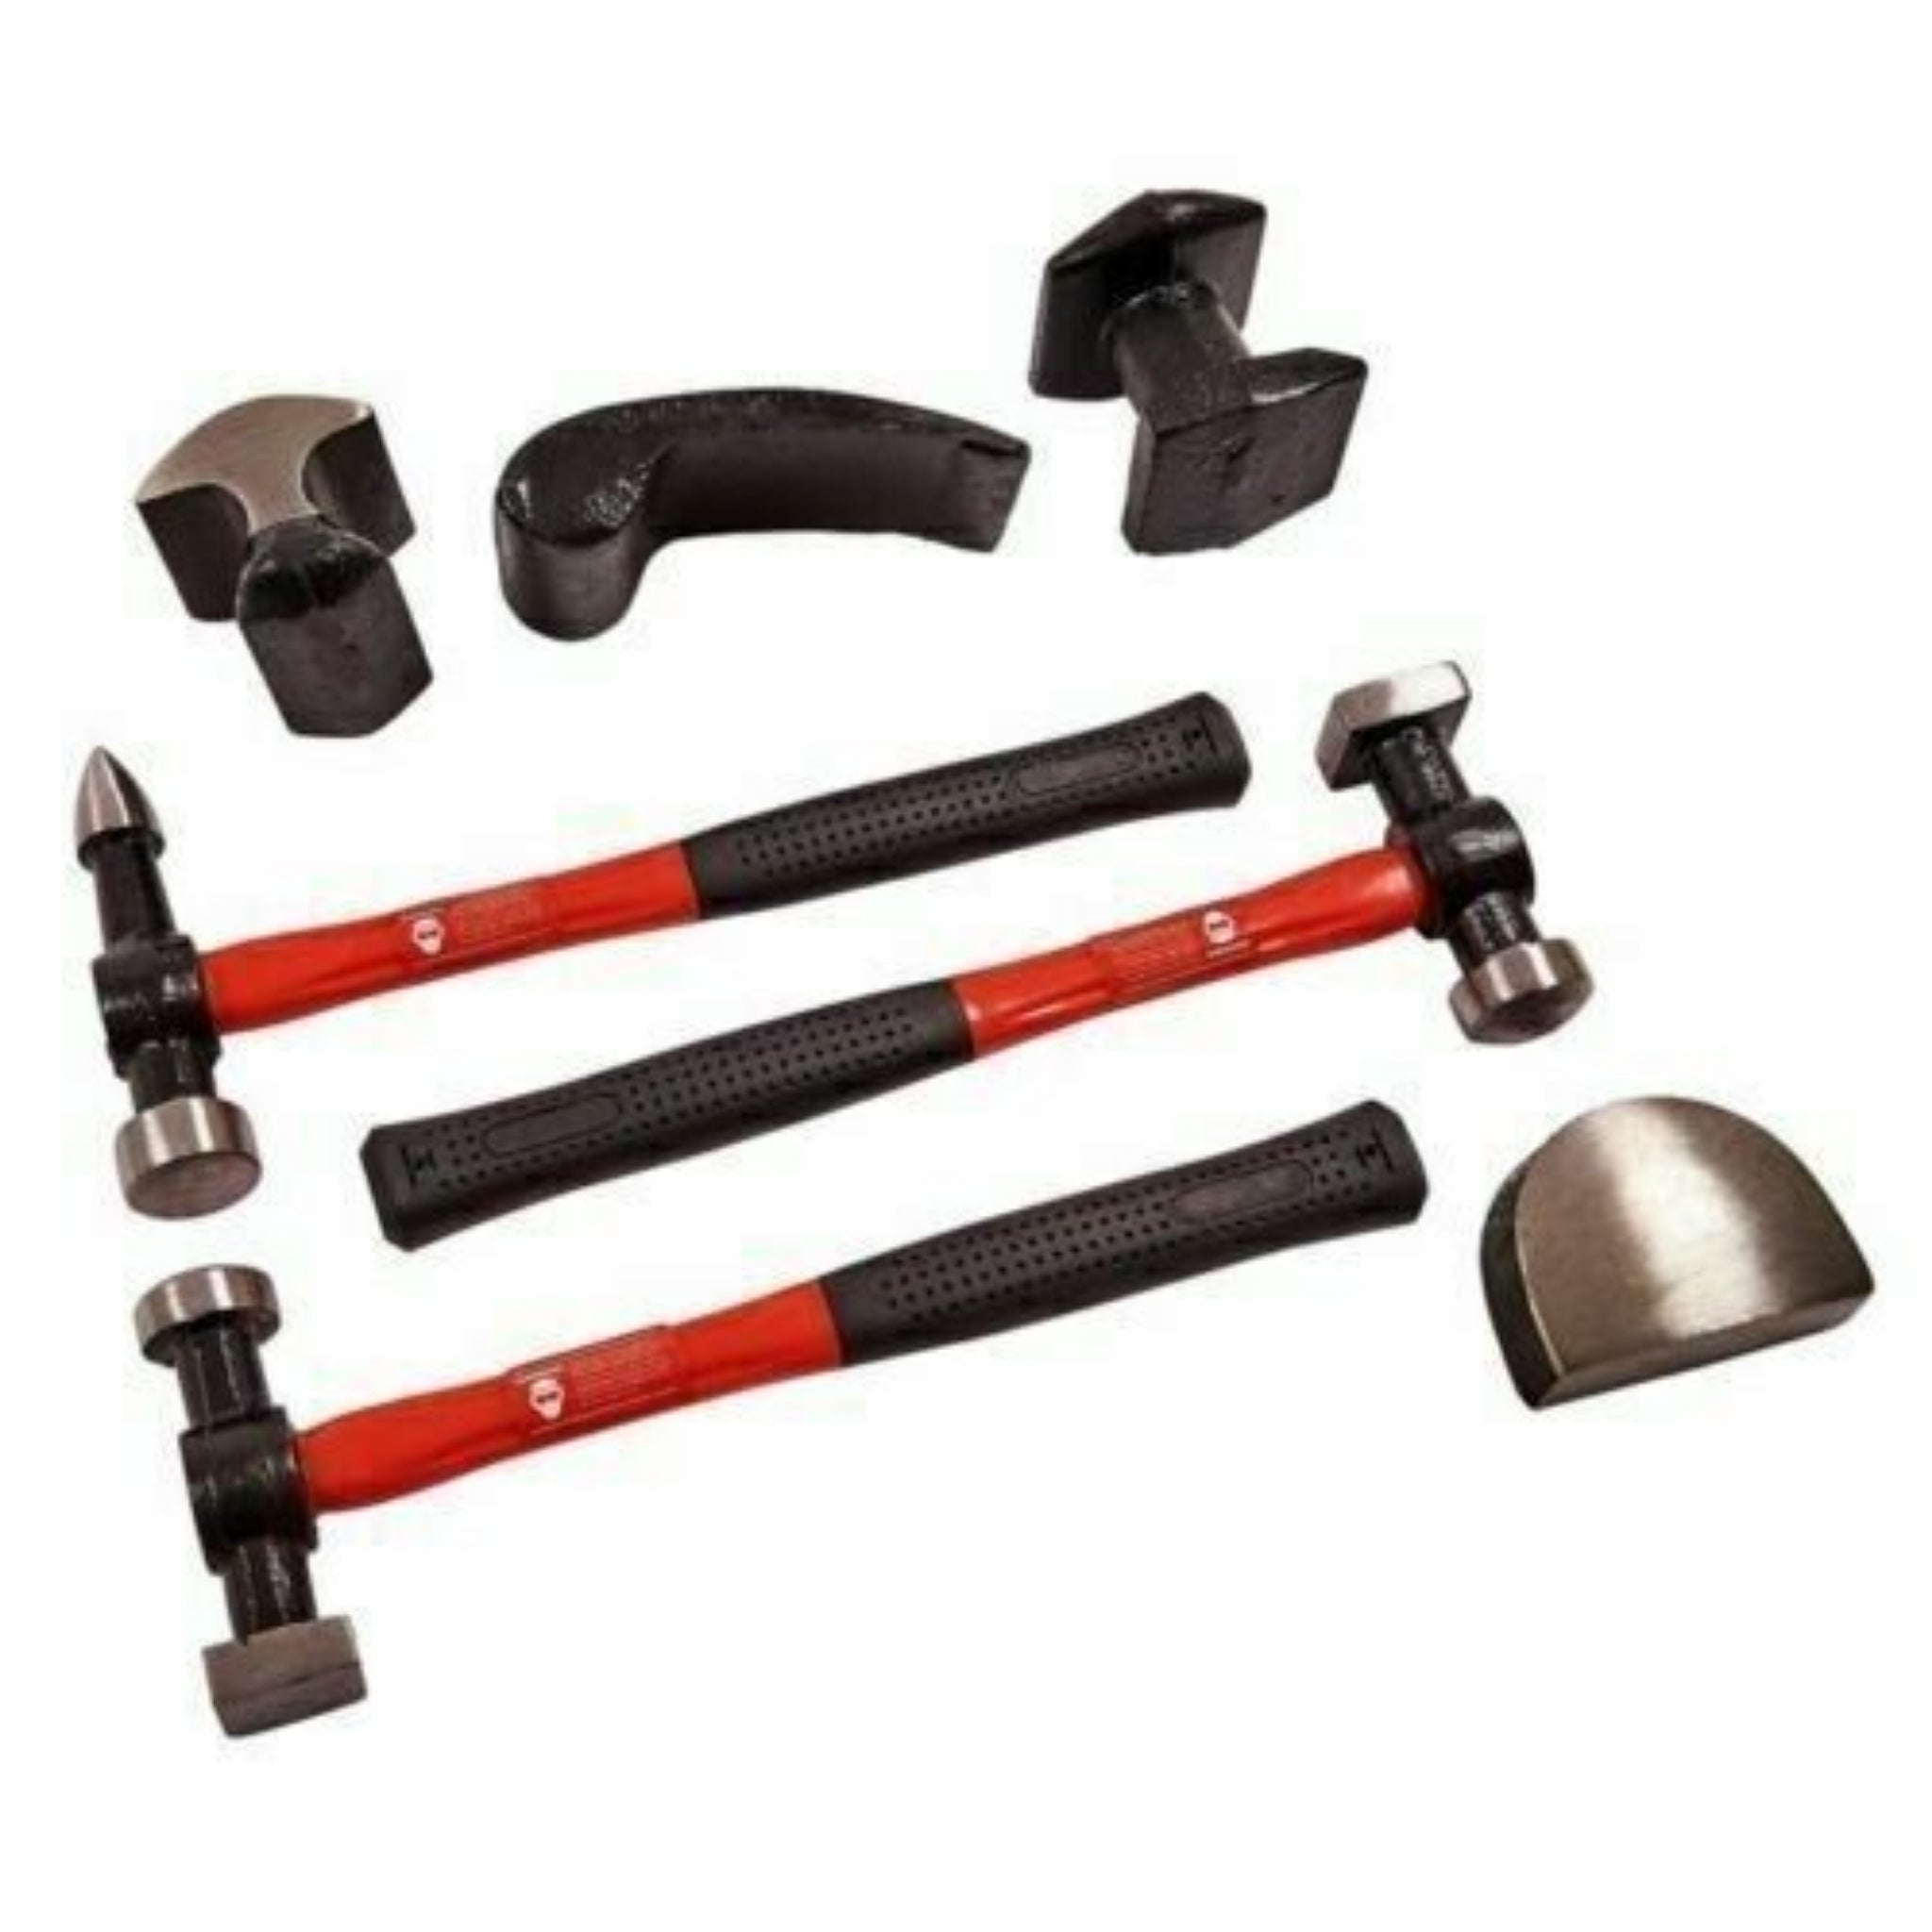 Beclen Harp 7pc Autobody Panel Repair/Dent Removal Tool Kit With Fiber Body Beating/Bumping Hammers